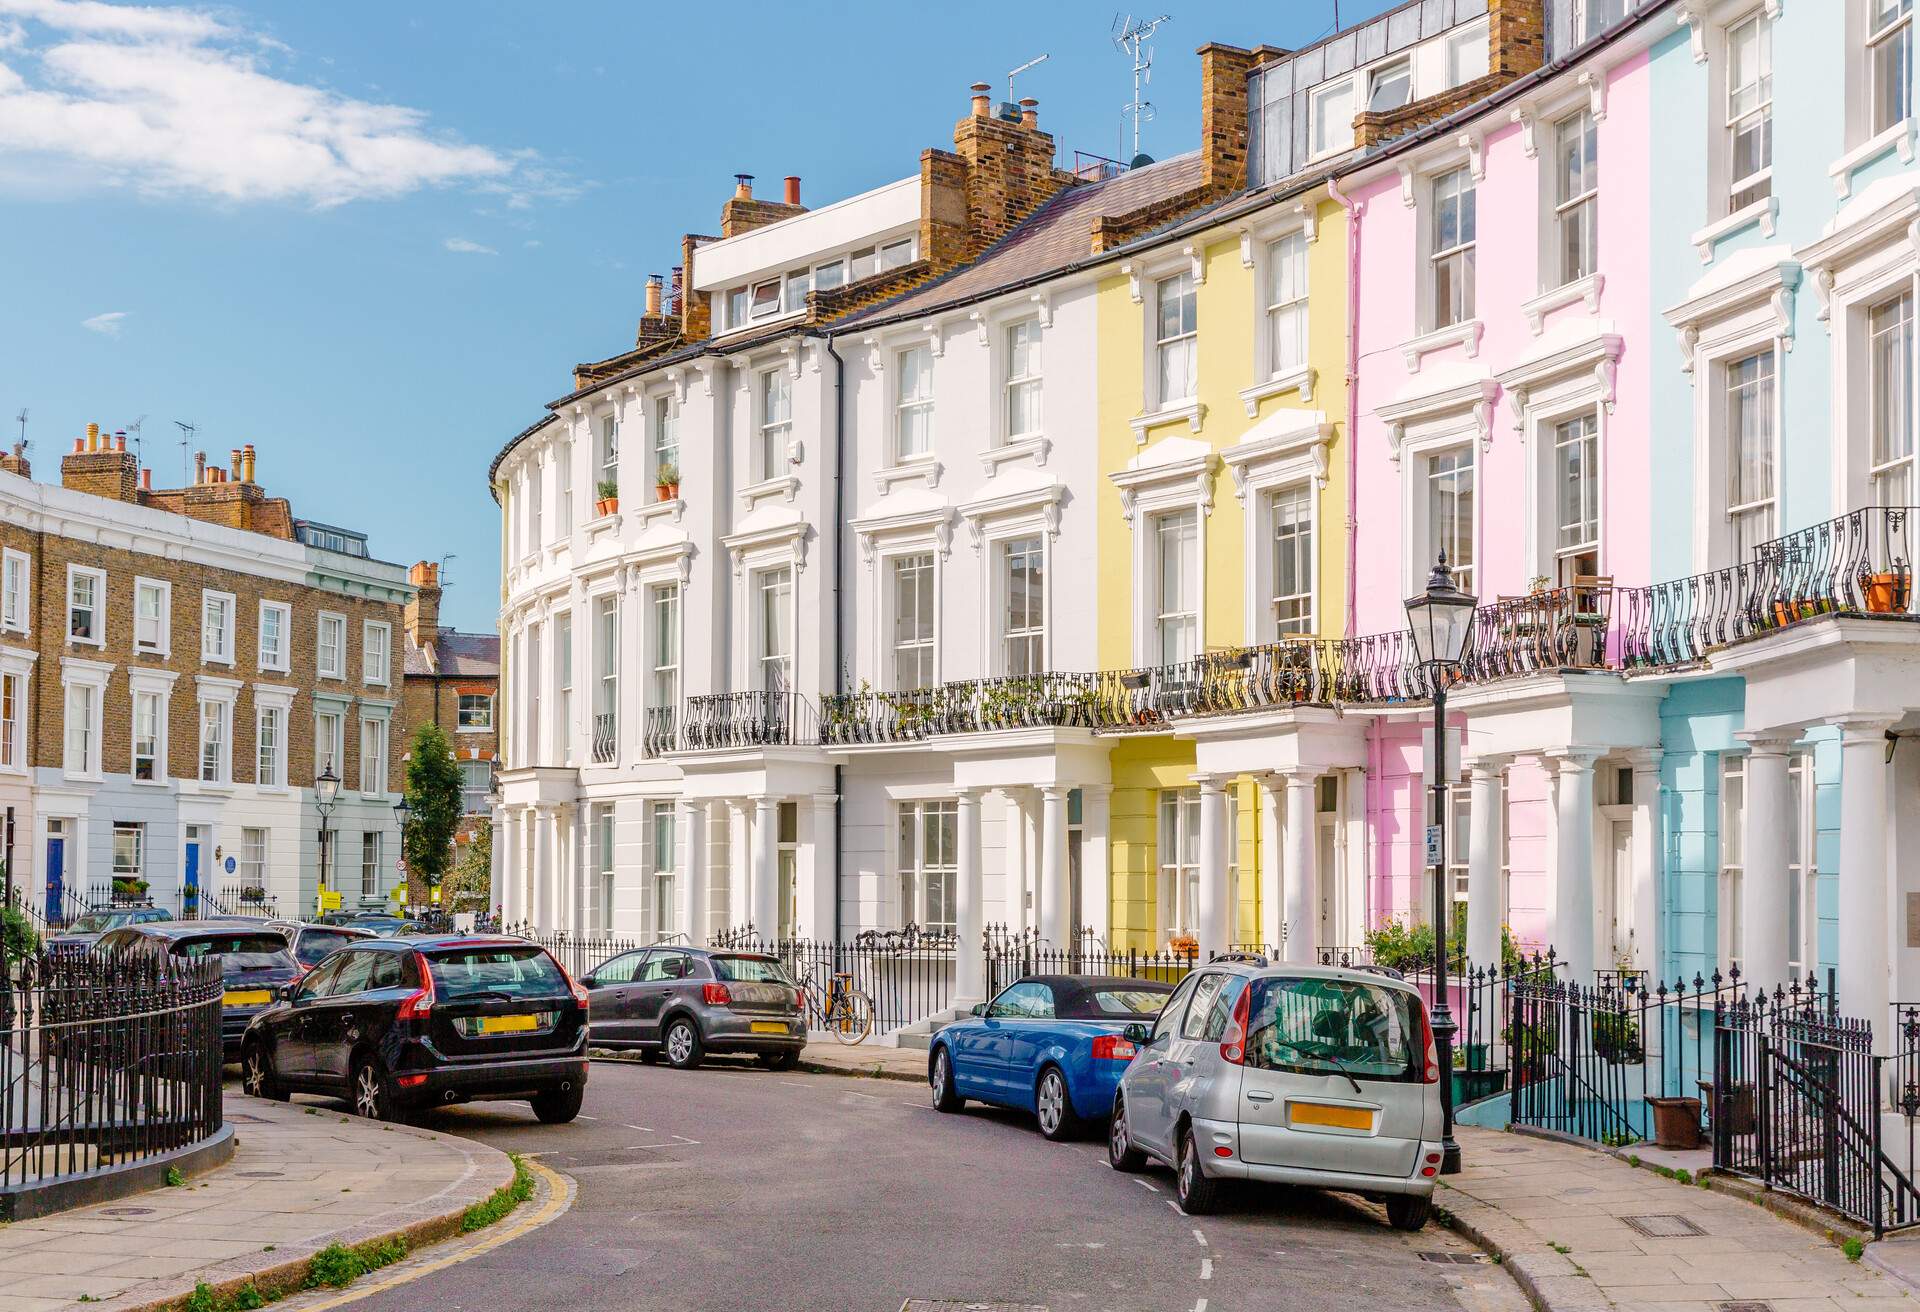 DEST_UK_ENGLAND_LONDON_PRIMROSE_HILL_MULTICOLORED_TOWNHOUSES_STREET_ROAD_GettyImages-1270244906